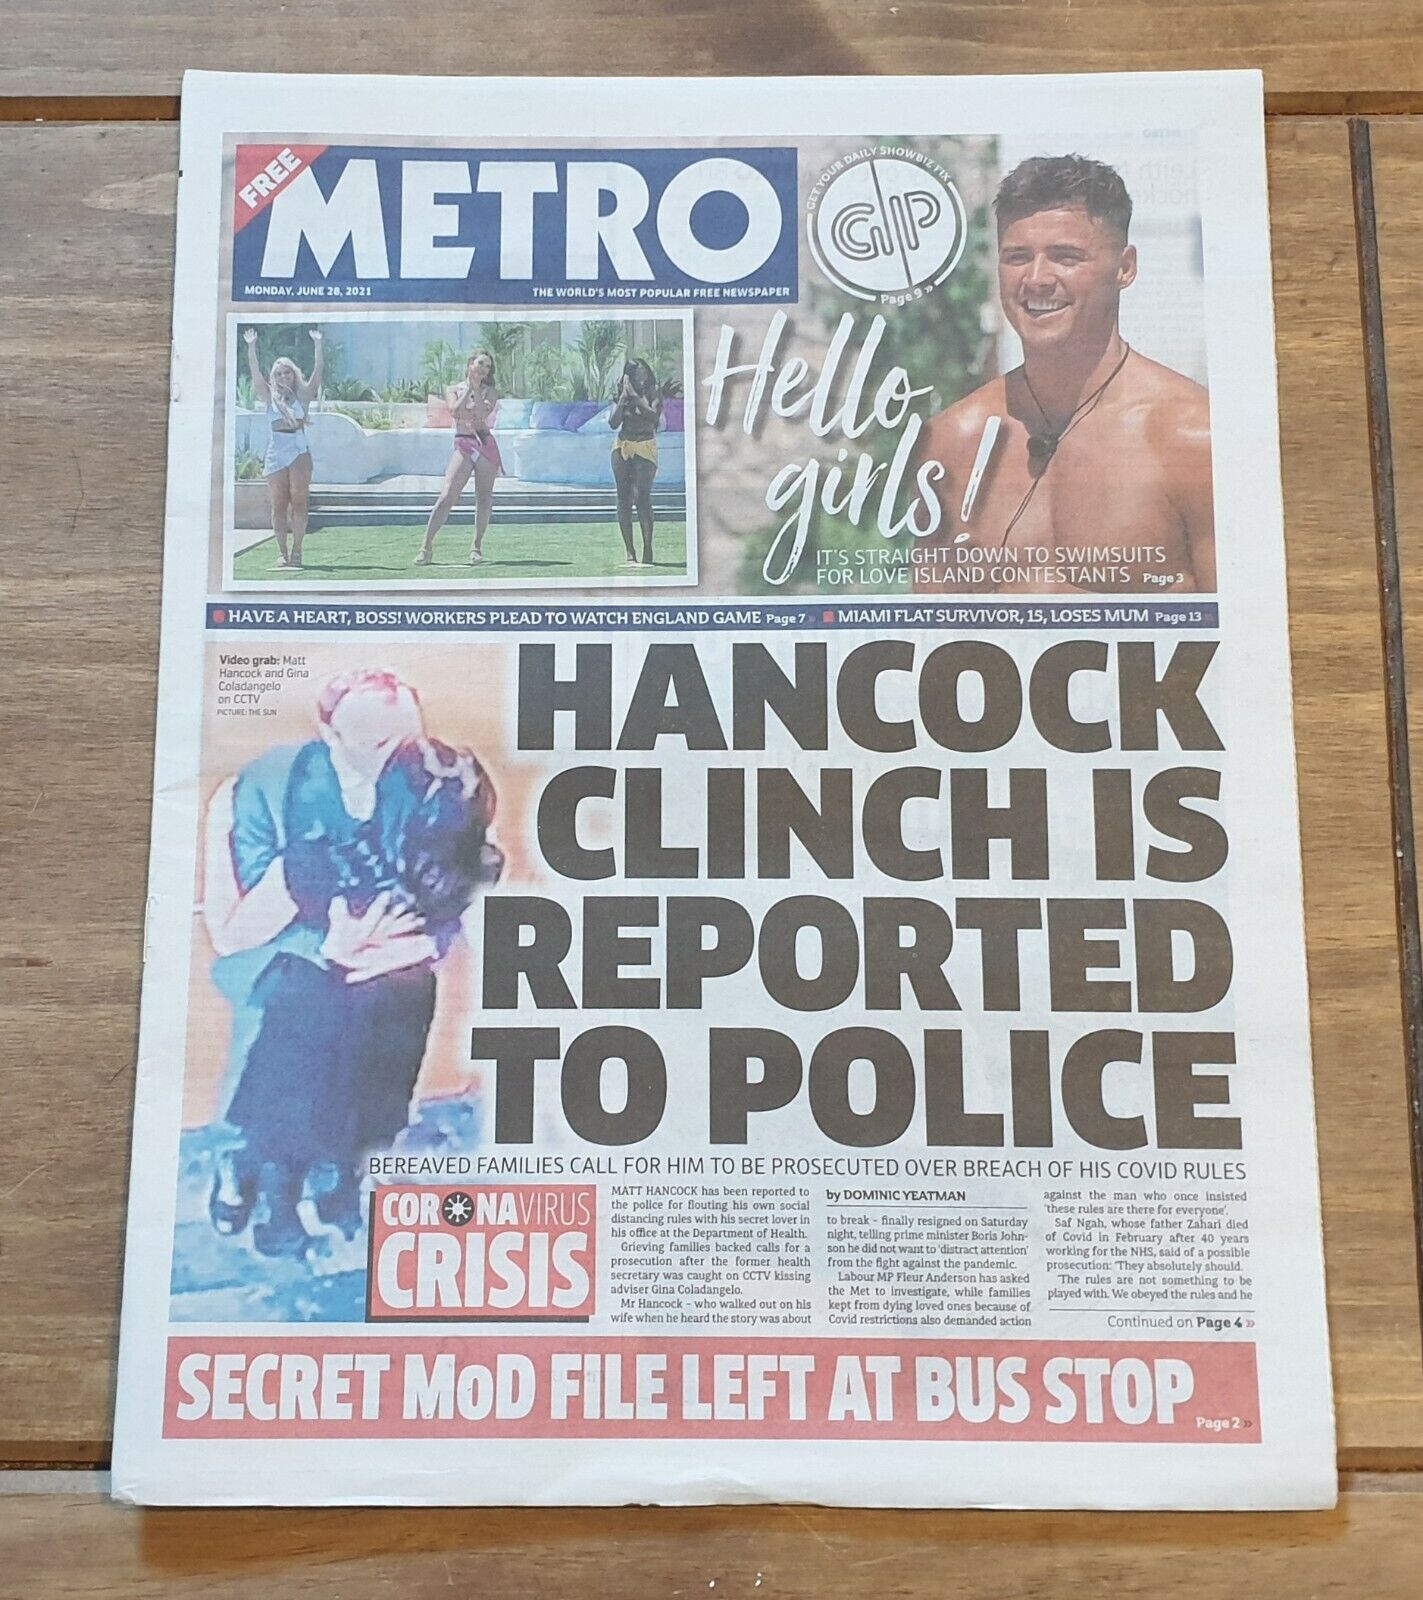 Metro Newspaper - 28th June 2021 - HANCOCK CLINCH IS REPORTED TO POLICE - Virus 